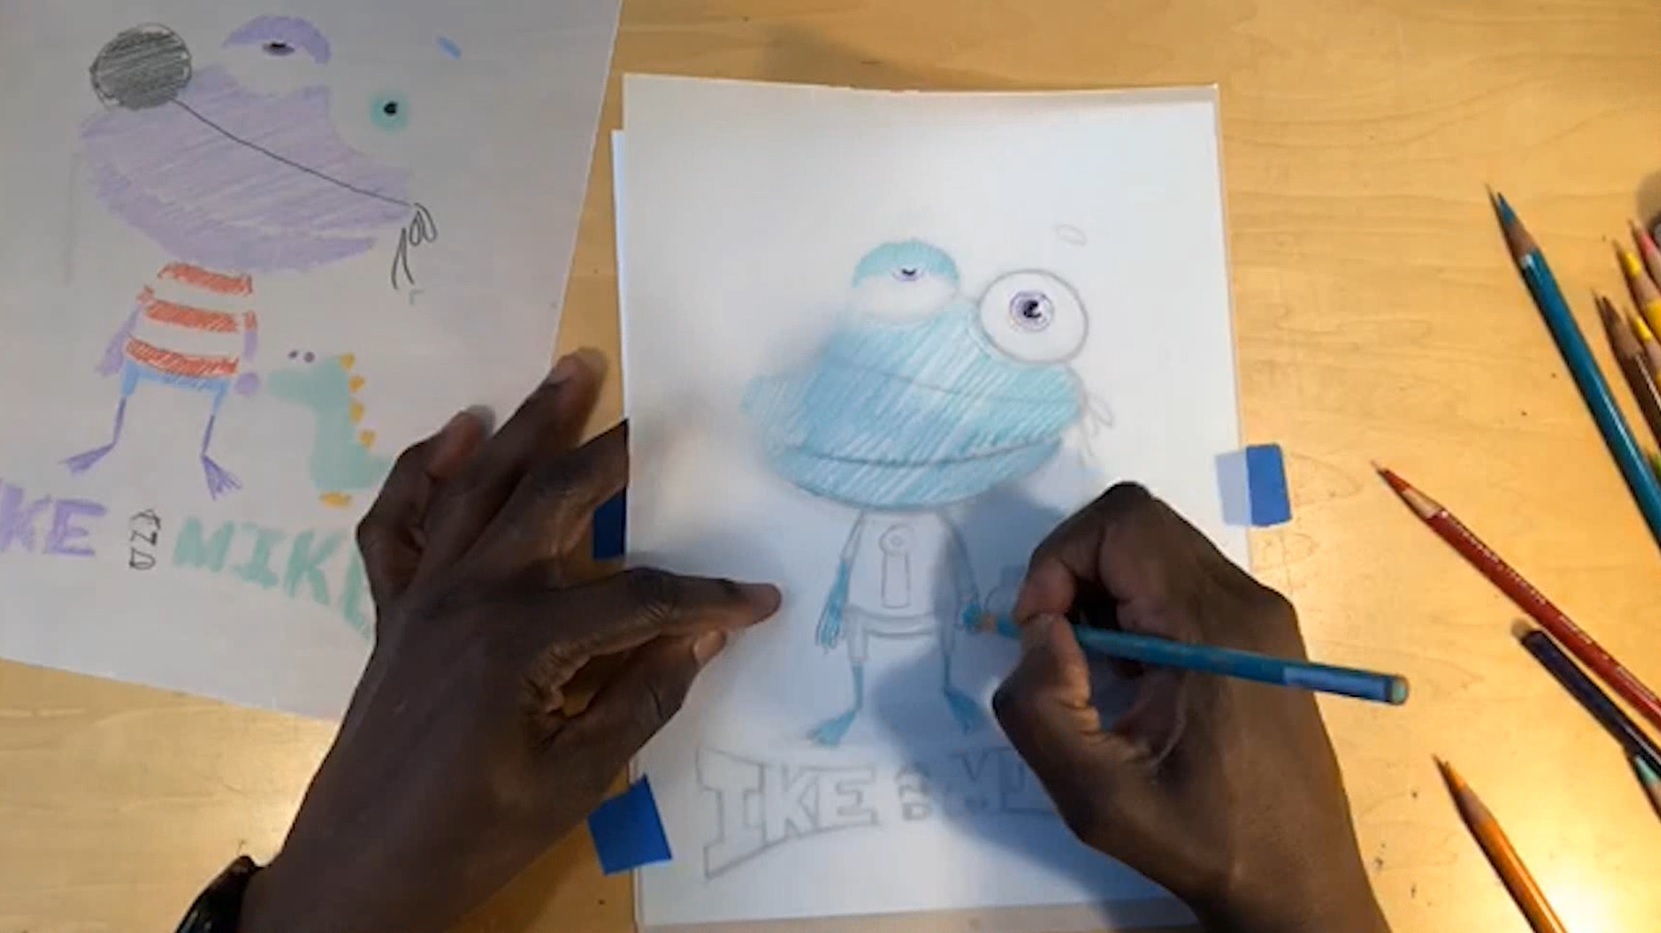 Two hands coloring a drawing of a cartoon character with a blue colored pencil